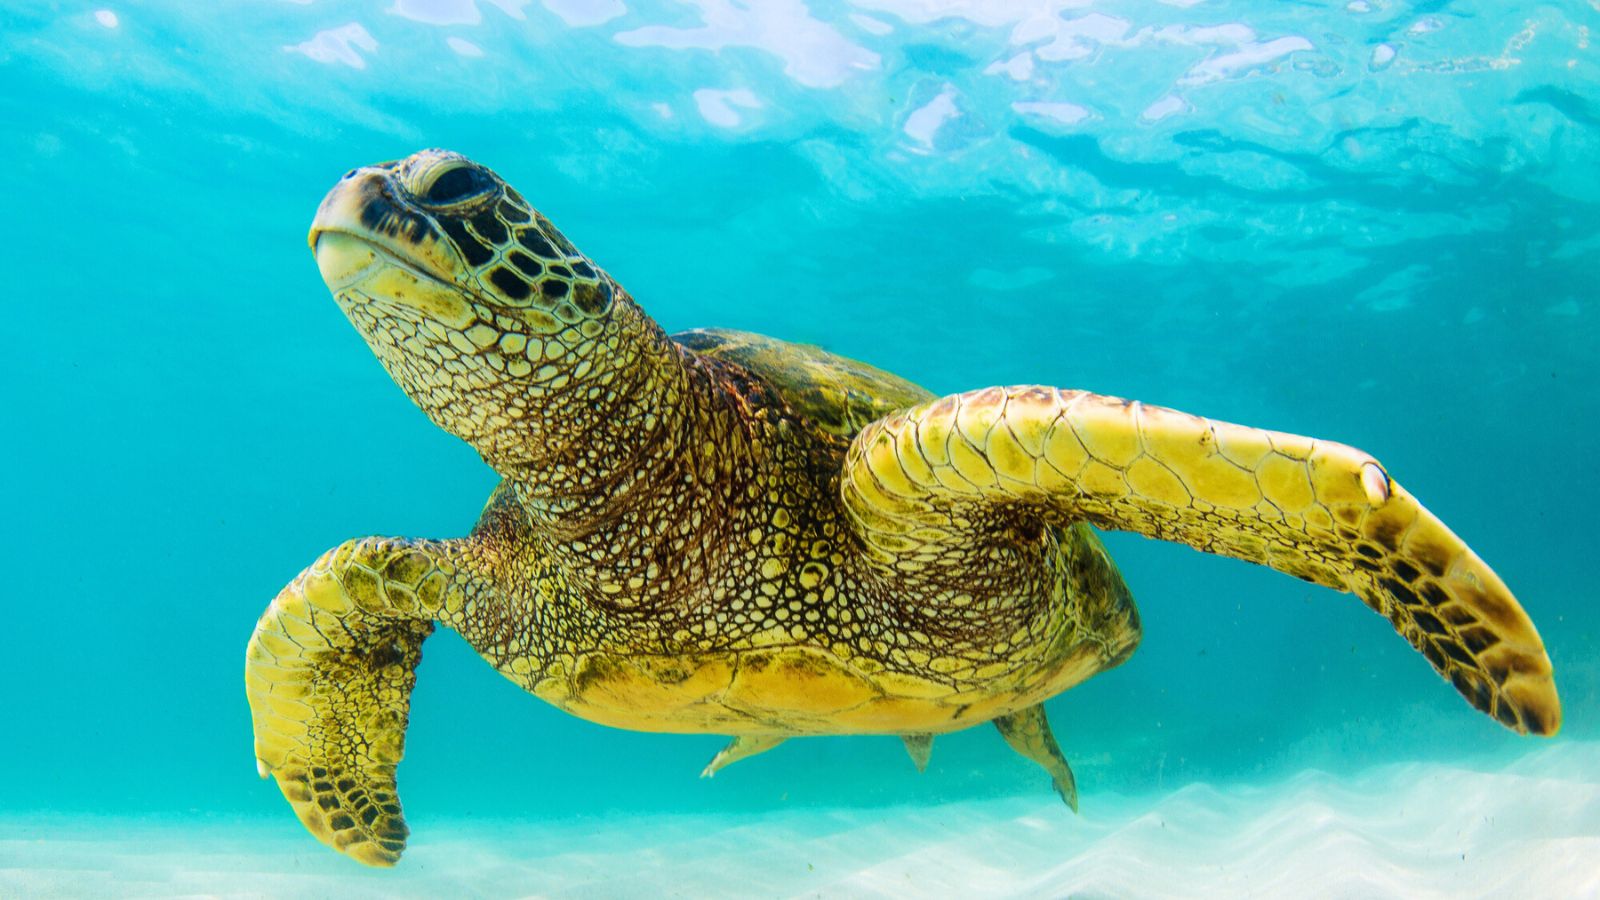 <p>If you’re one of many naturalists hoping to spot turtles this year, you’re probably curious about where these marine creatures thrive. Here are some of the best spots to watch turtles around the world:</p>